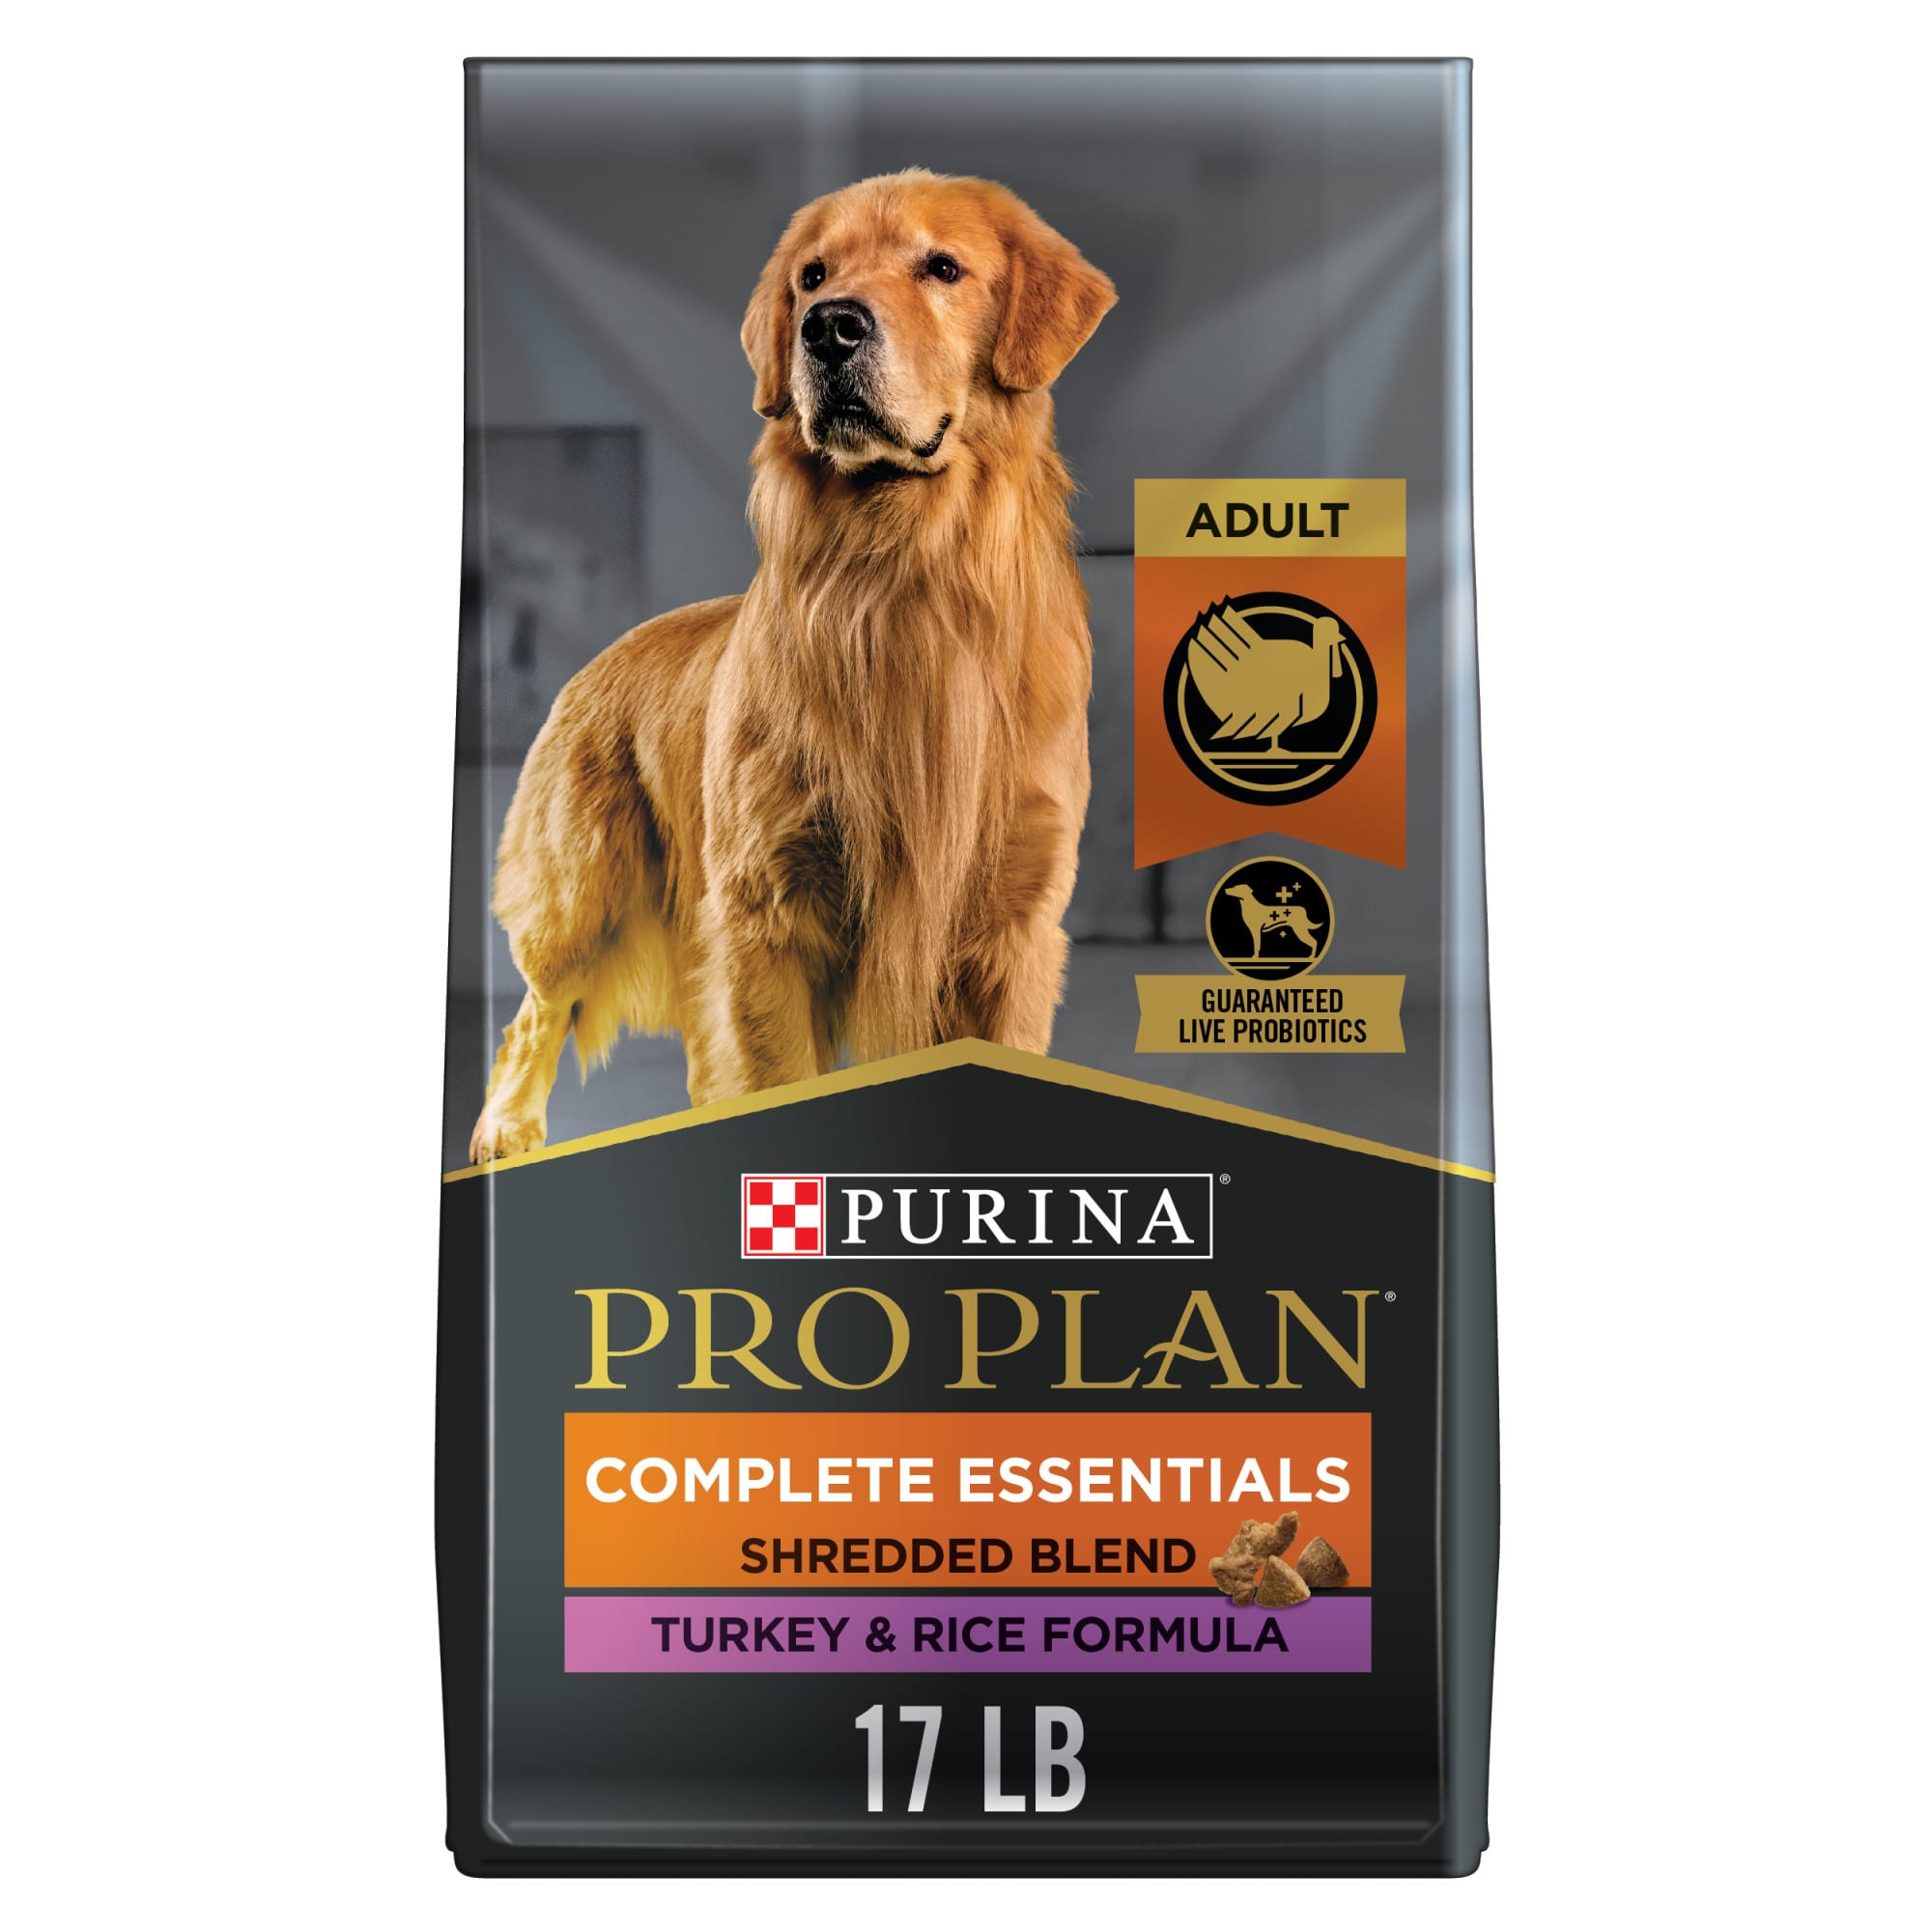 Discover the Quality Ingredients in Purina Pro Plan Dog Food